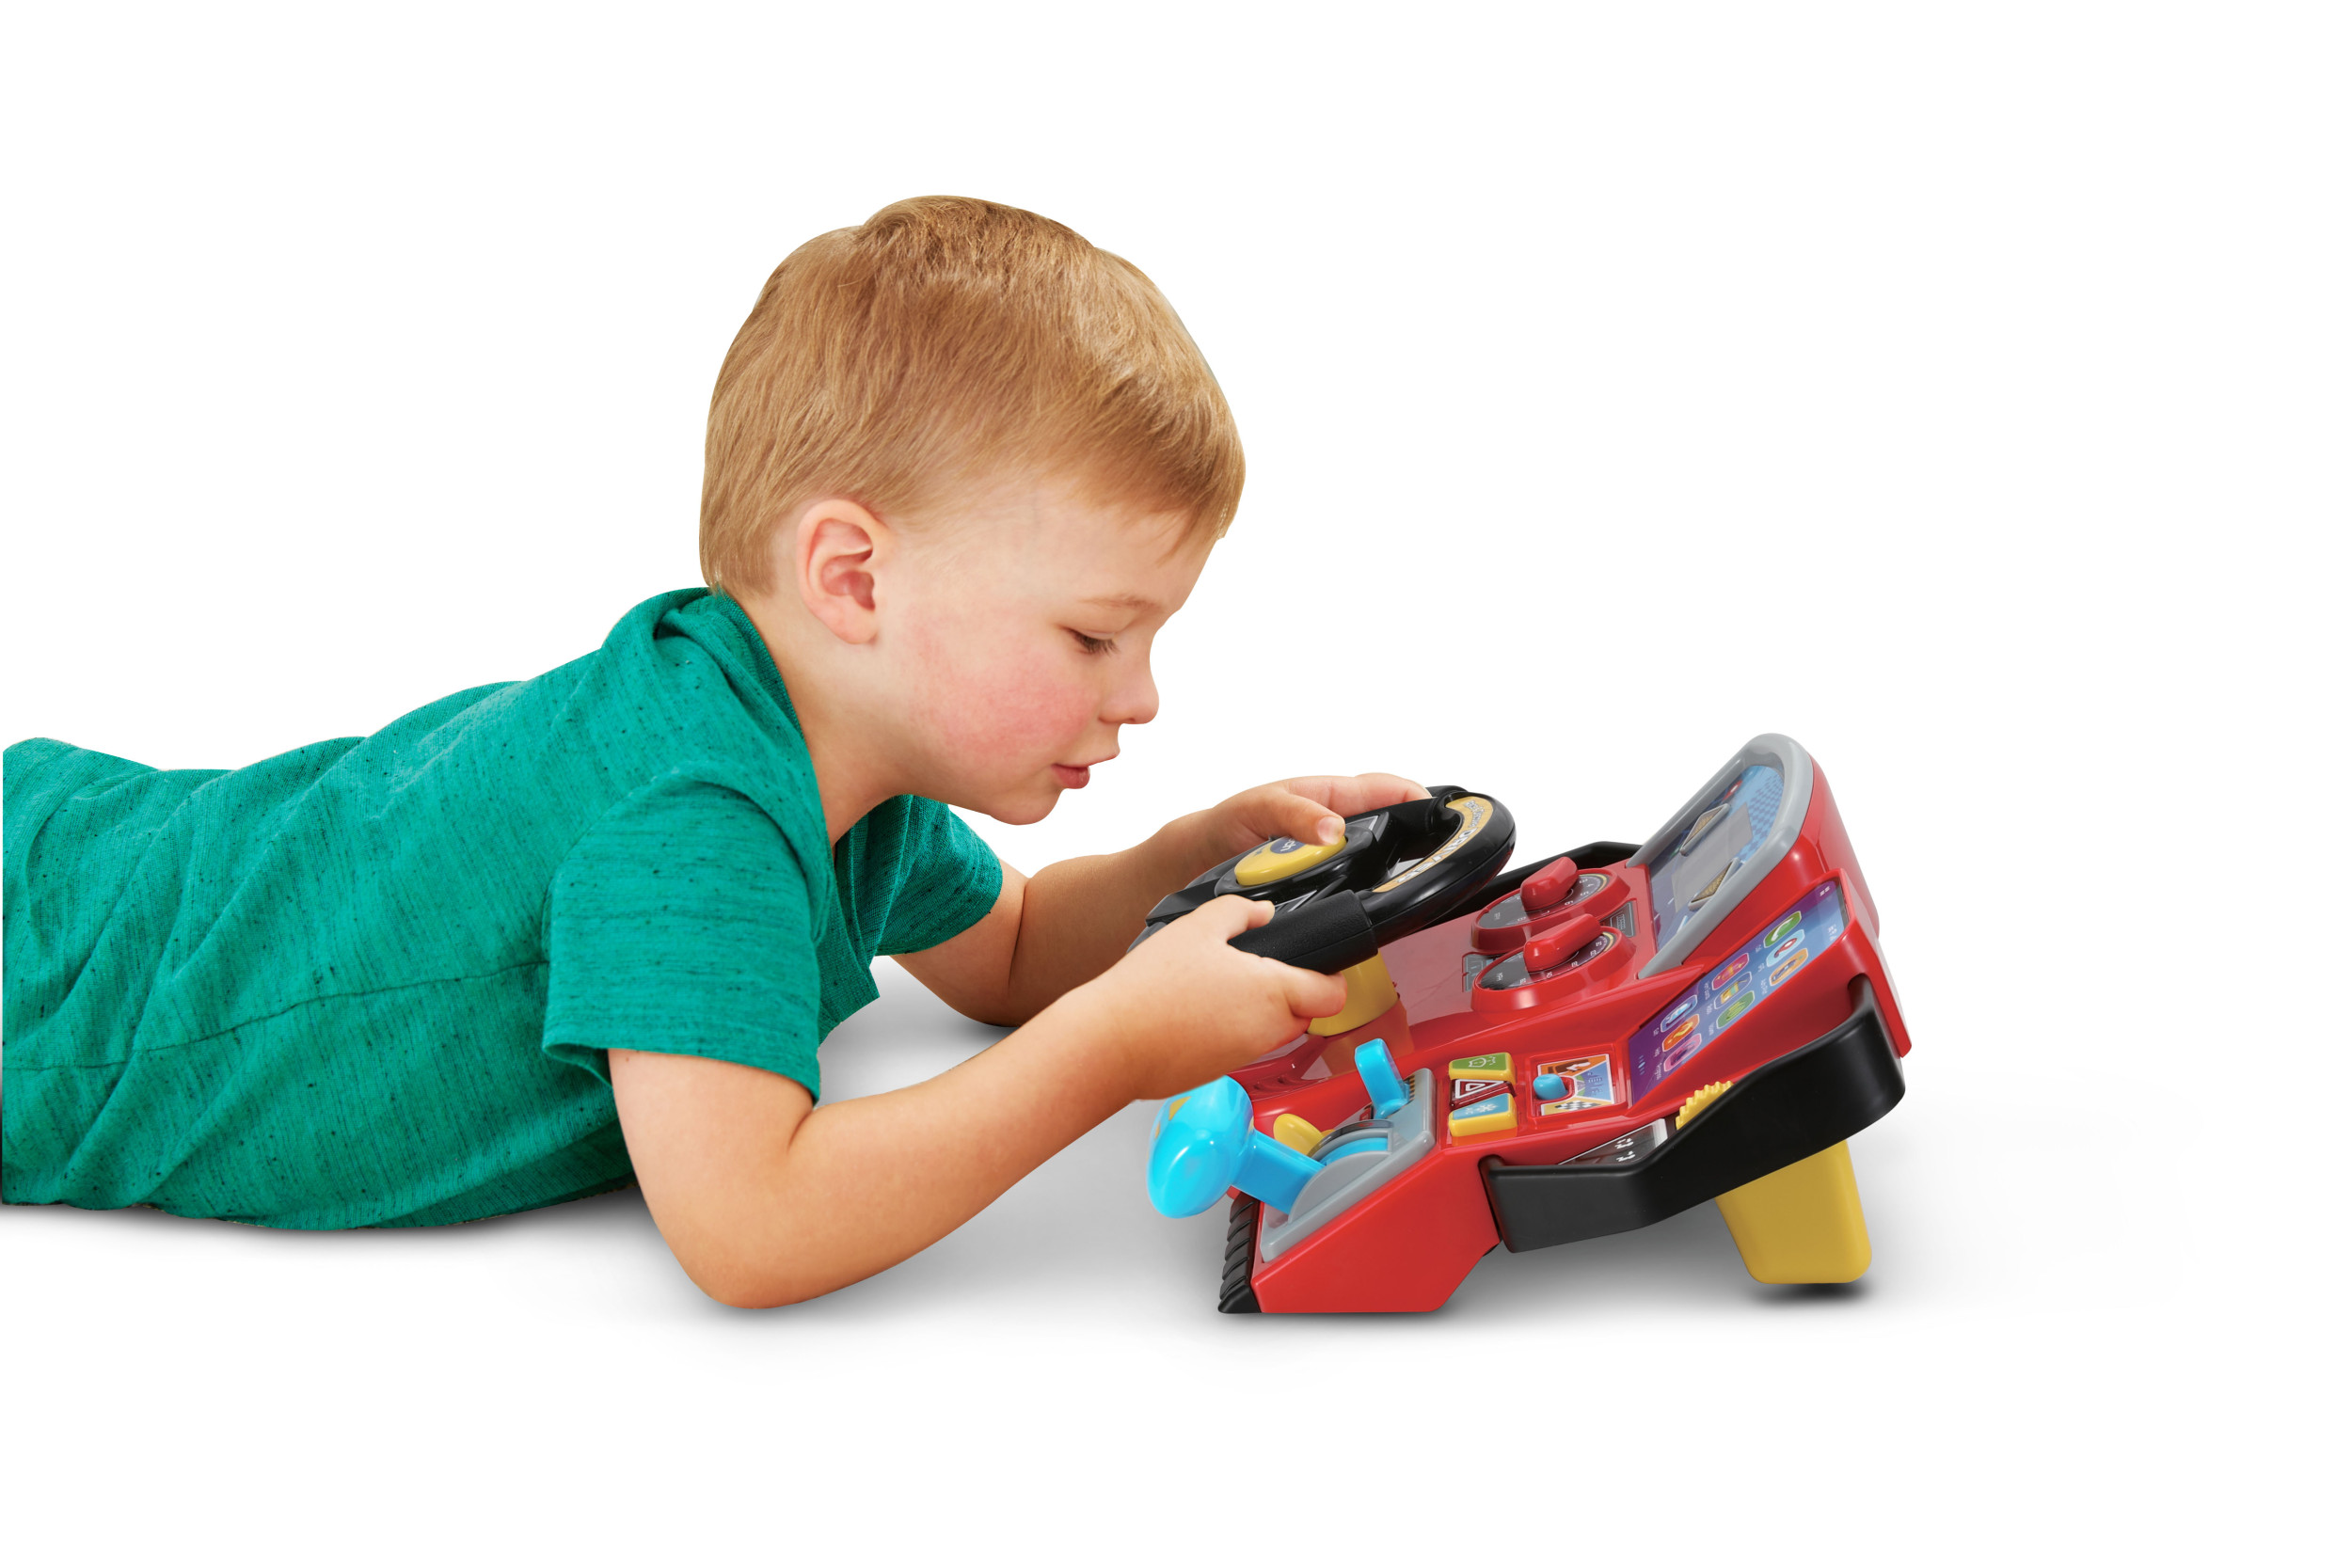 Win 1 Of 2 VTech Prize Packs Valued At $289 Each! - Competition